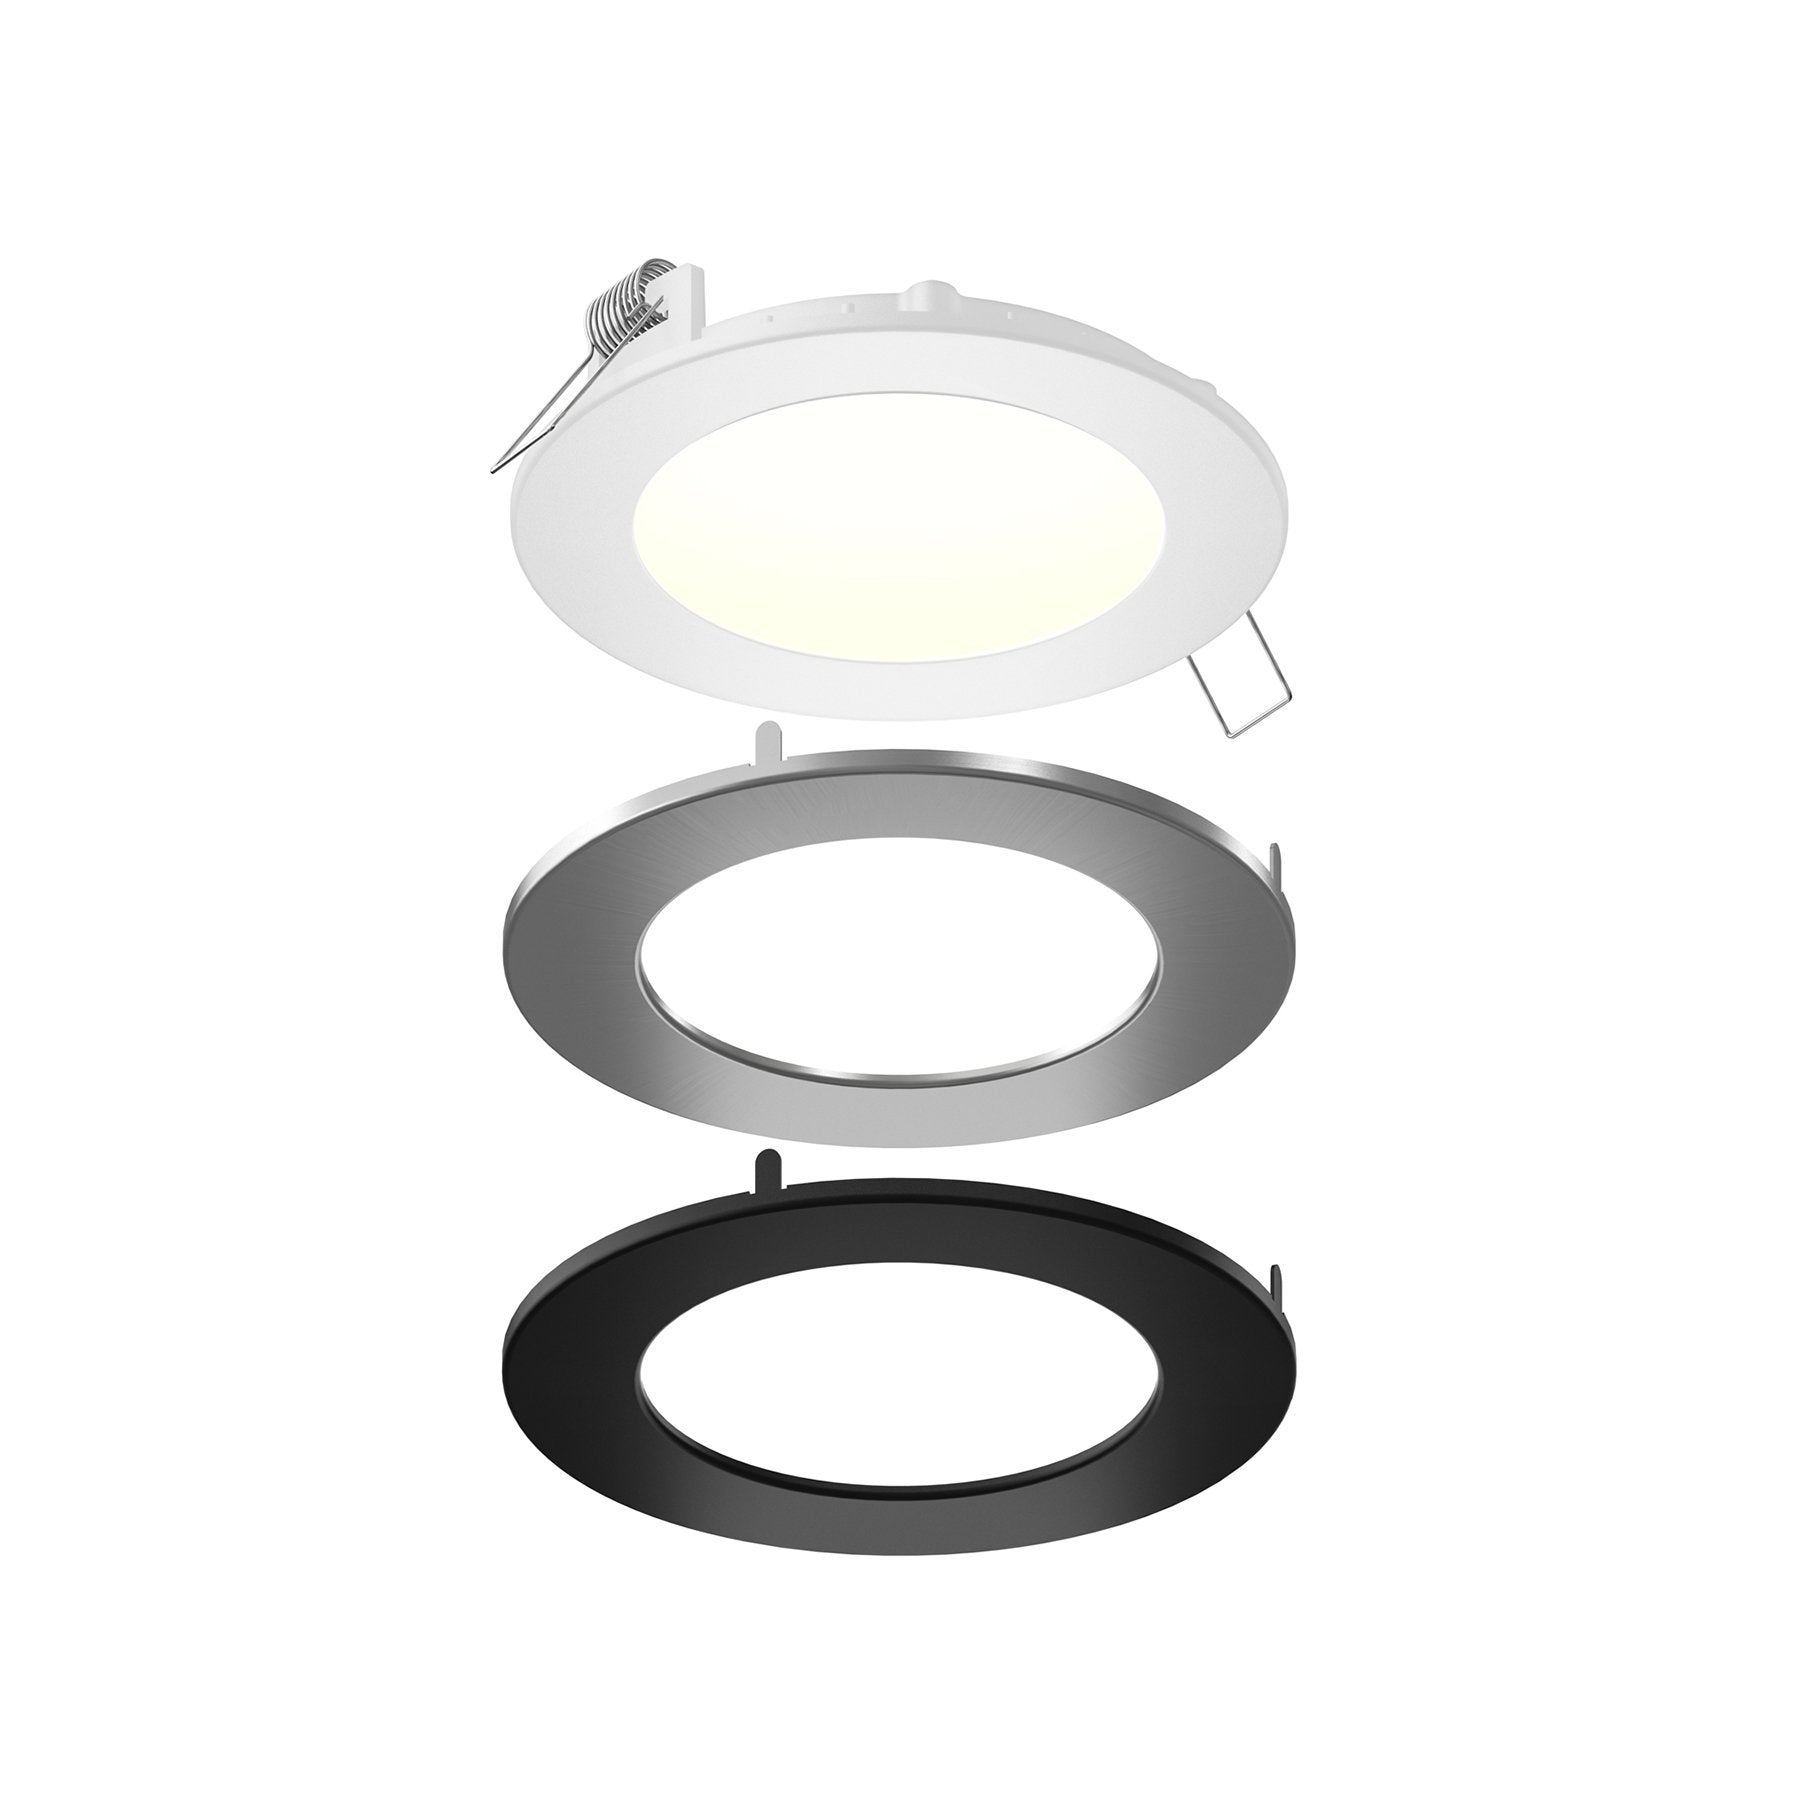 4 Inch LED Round Panel Downlight, 11W, Wet Location, CCT Changeable